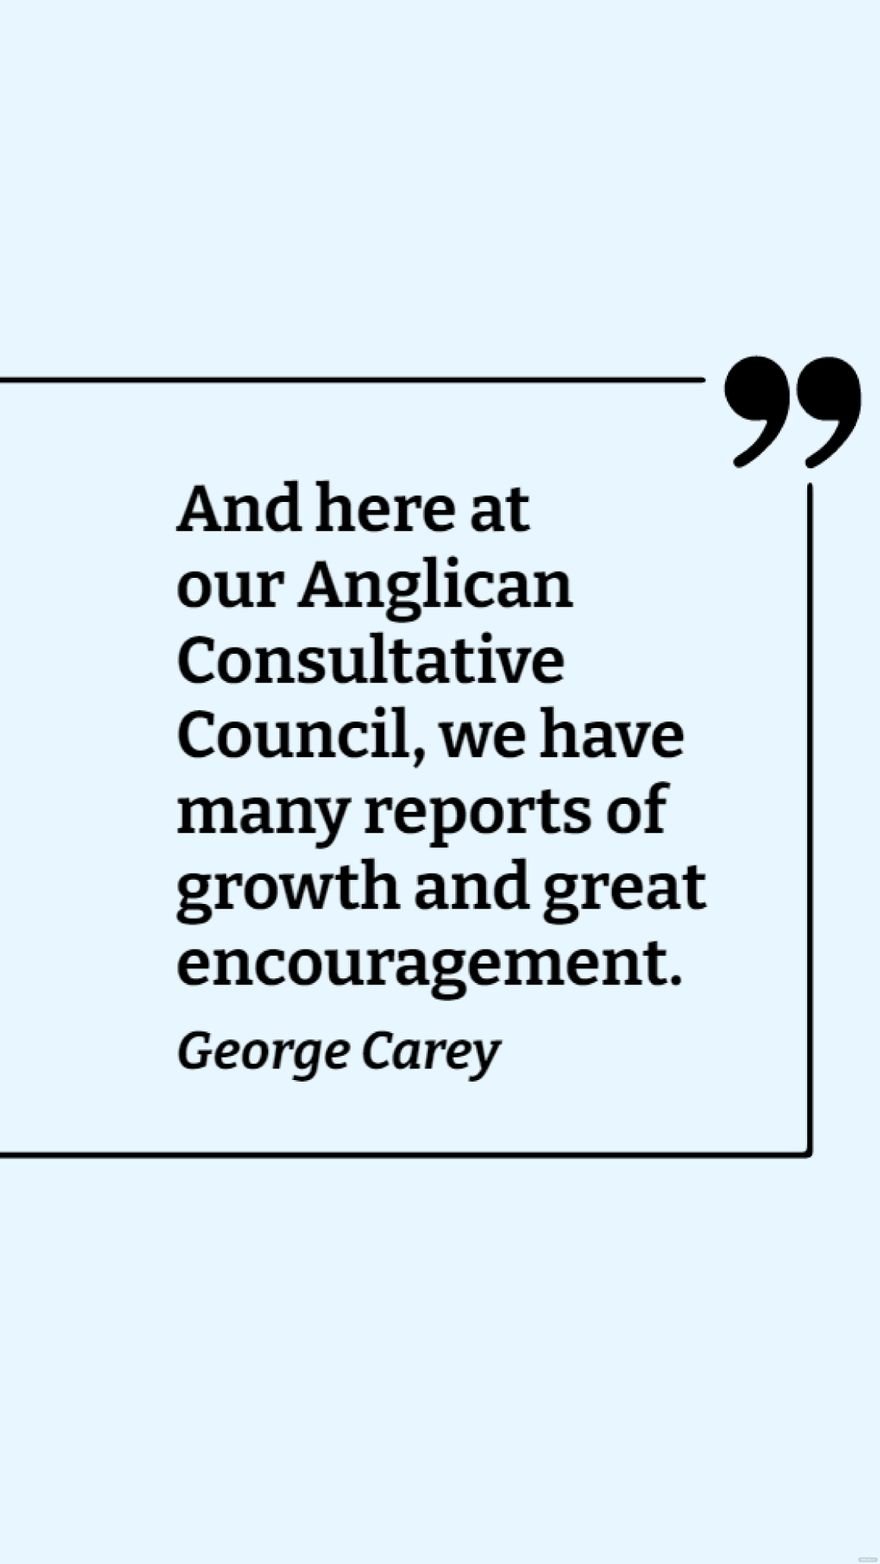 Free George Carey - And here at our Anglican Consultative Council, we have many reports of growth and great encouragement. in JPG